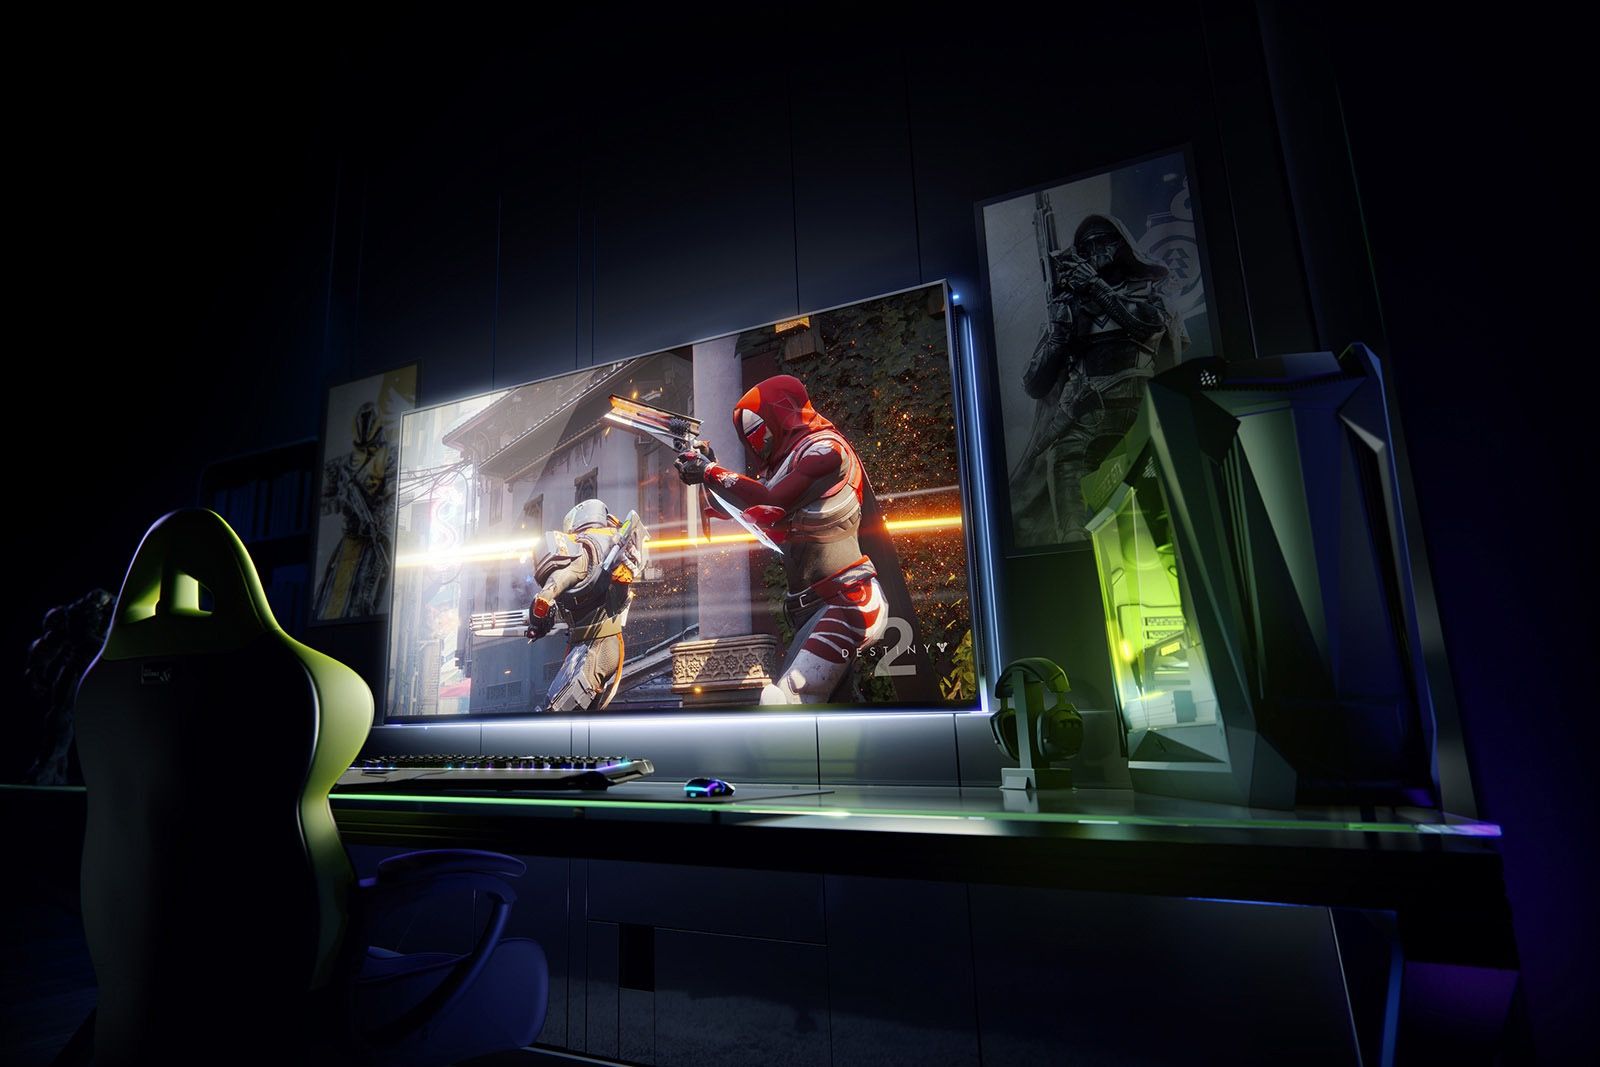 Nvidia 65-inch 120hz 4k Hdr Big Format Gaming Displays Come With Shield Android Tv Built In image 1